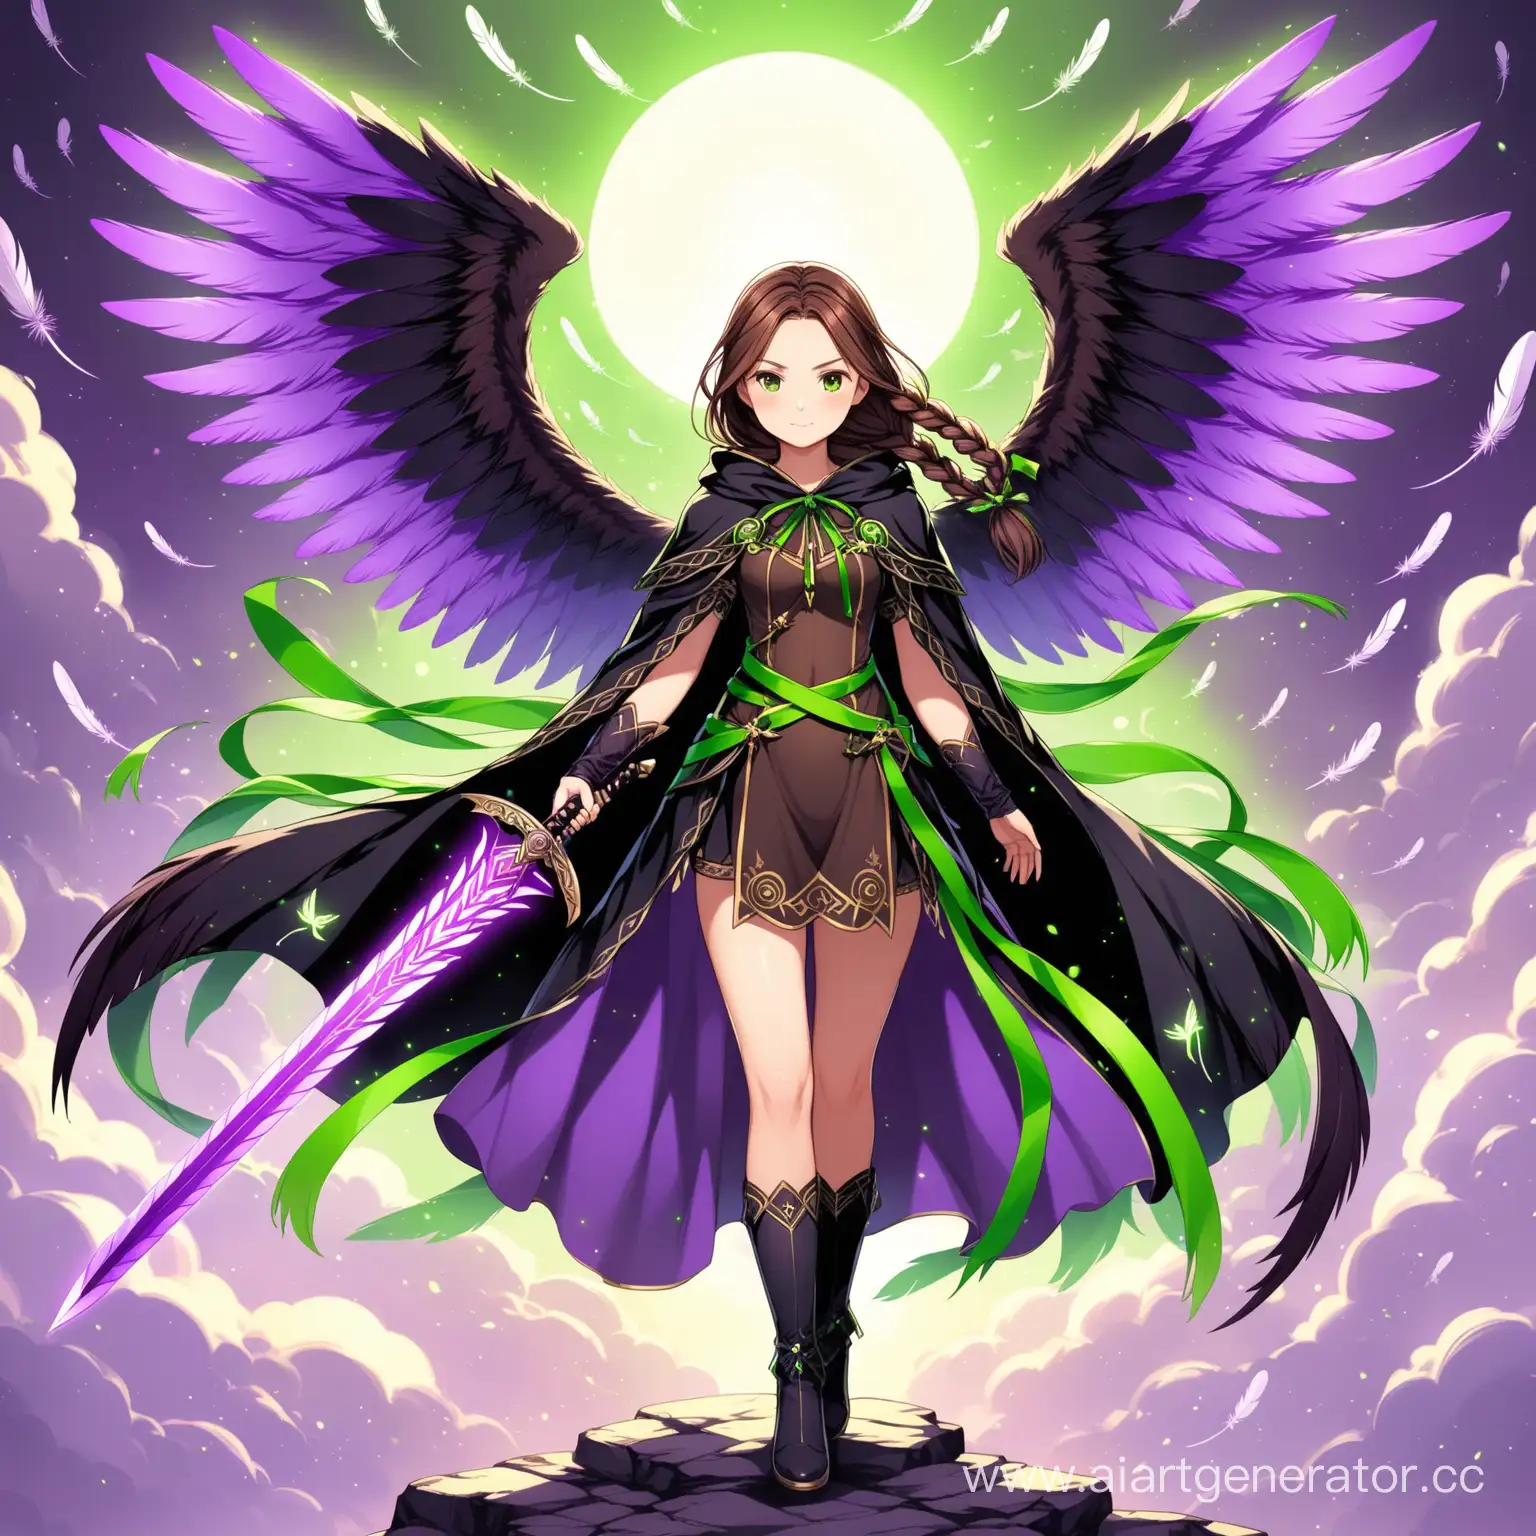 Young-Girl-with-Braided-Brown-Hair-Adorned-in-Green-and-Purple-Wearing-Winged-Cloak-and-Holding-Sword